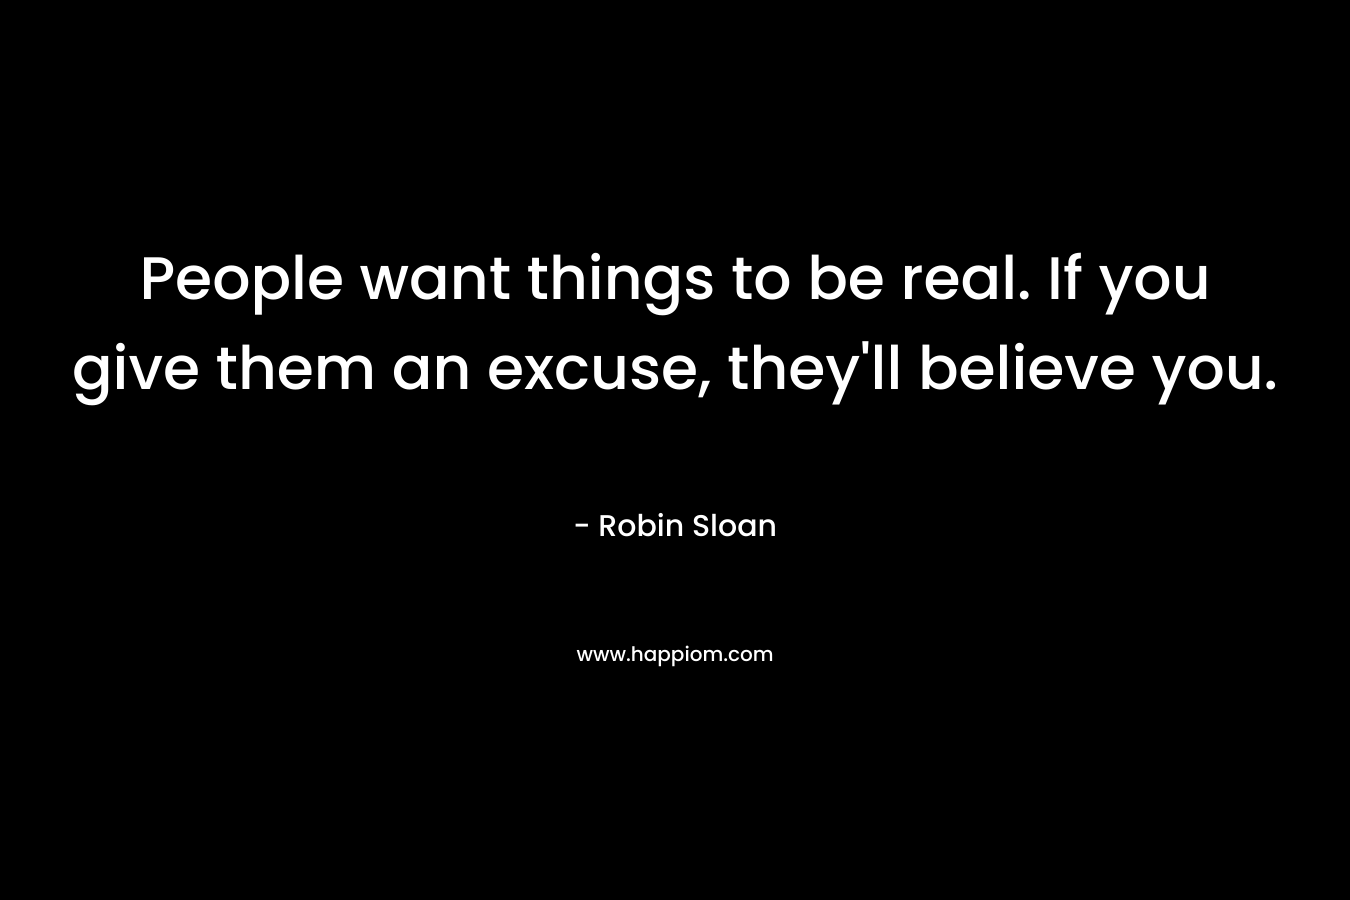 People want things to be real. If you give them an excuse, they’ll believe you. – Robin Sloan